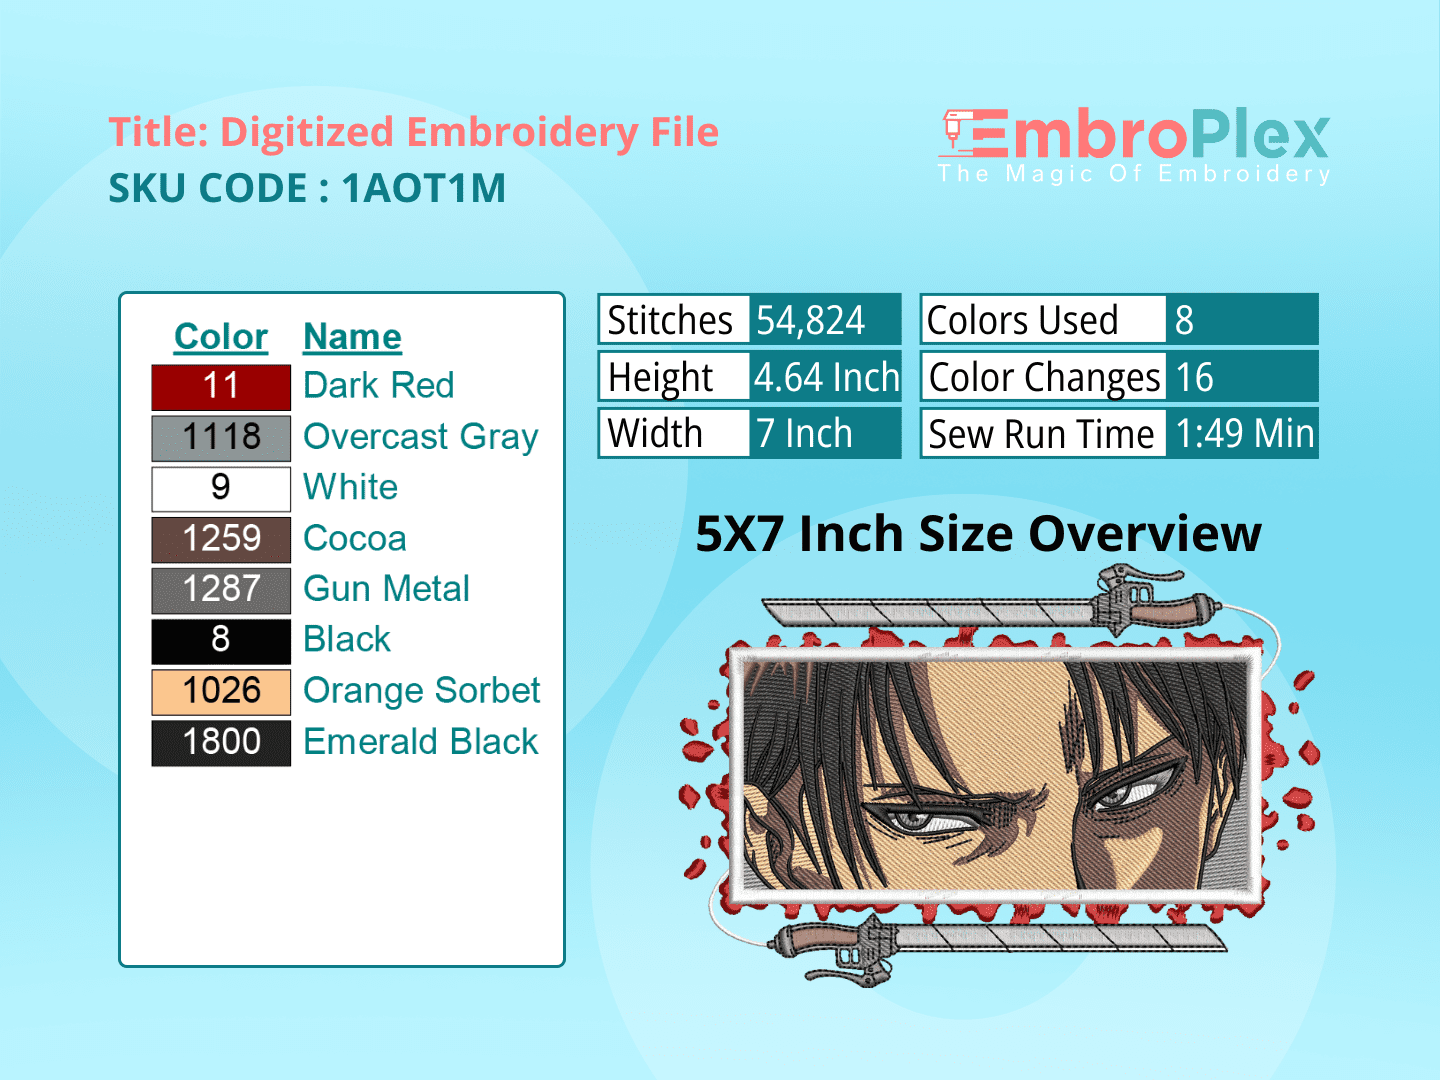 Anime-Inspired Eren Embroidery Design File - 5x7 Inch hoop Size Variation overview image